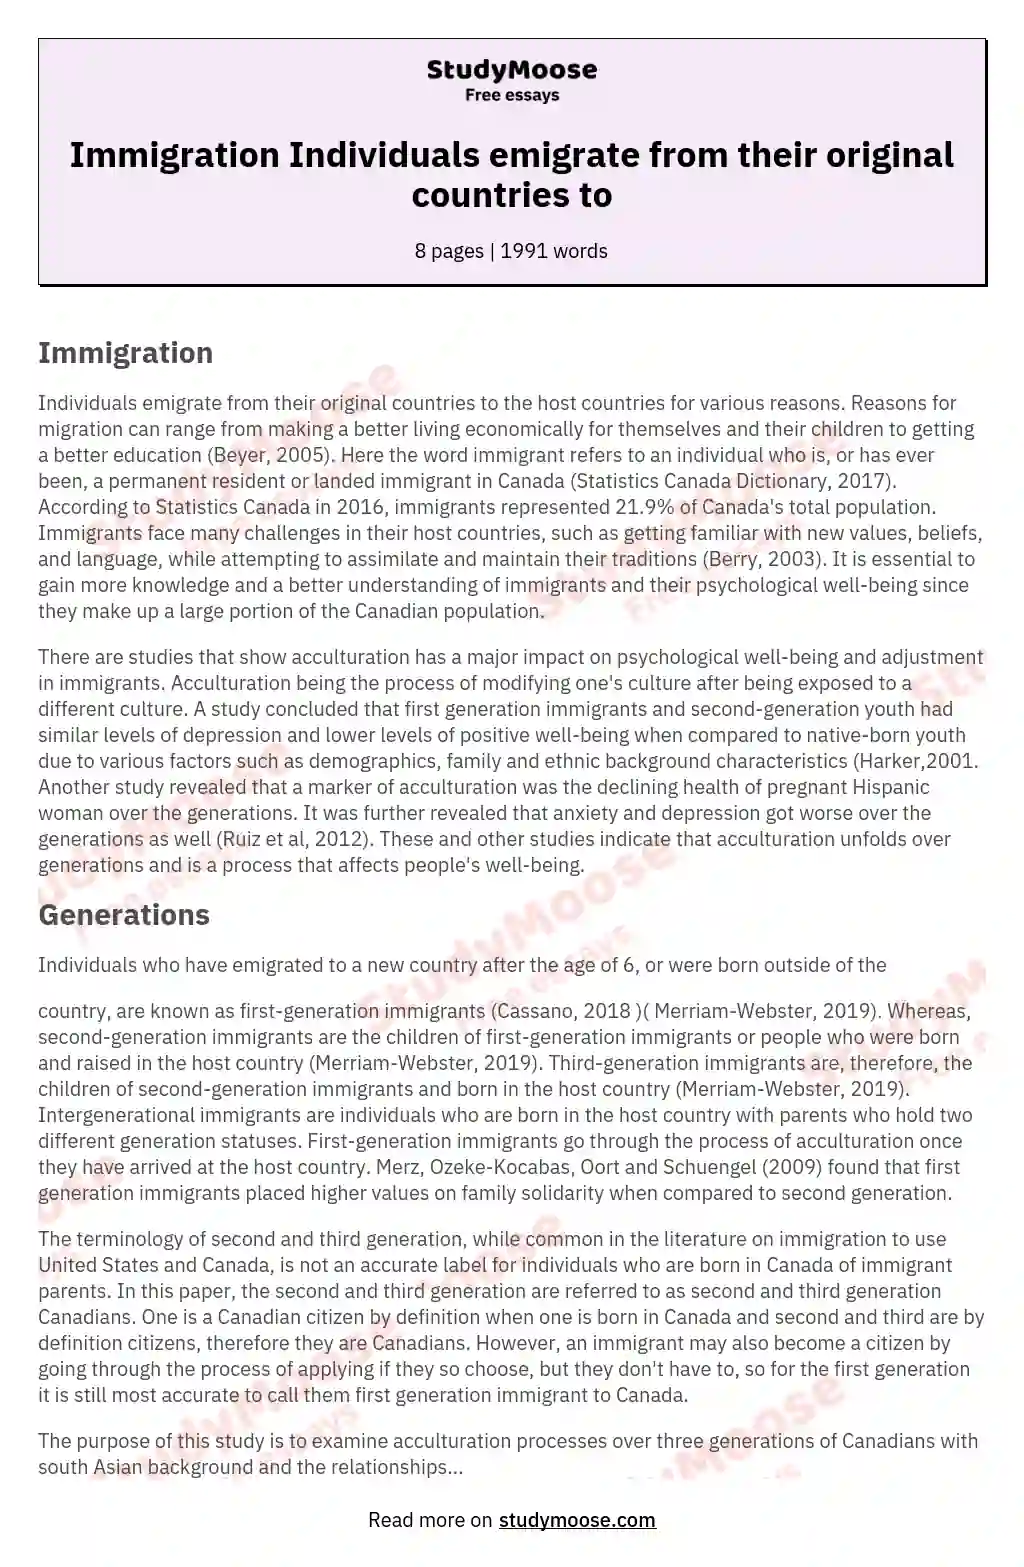 Immigration Individuals emigrate from their original countries to essay